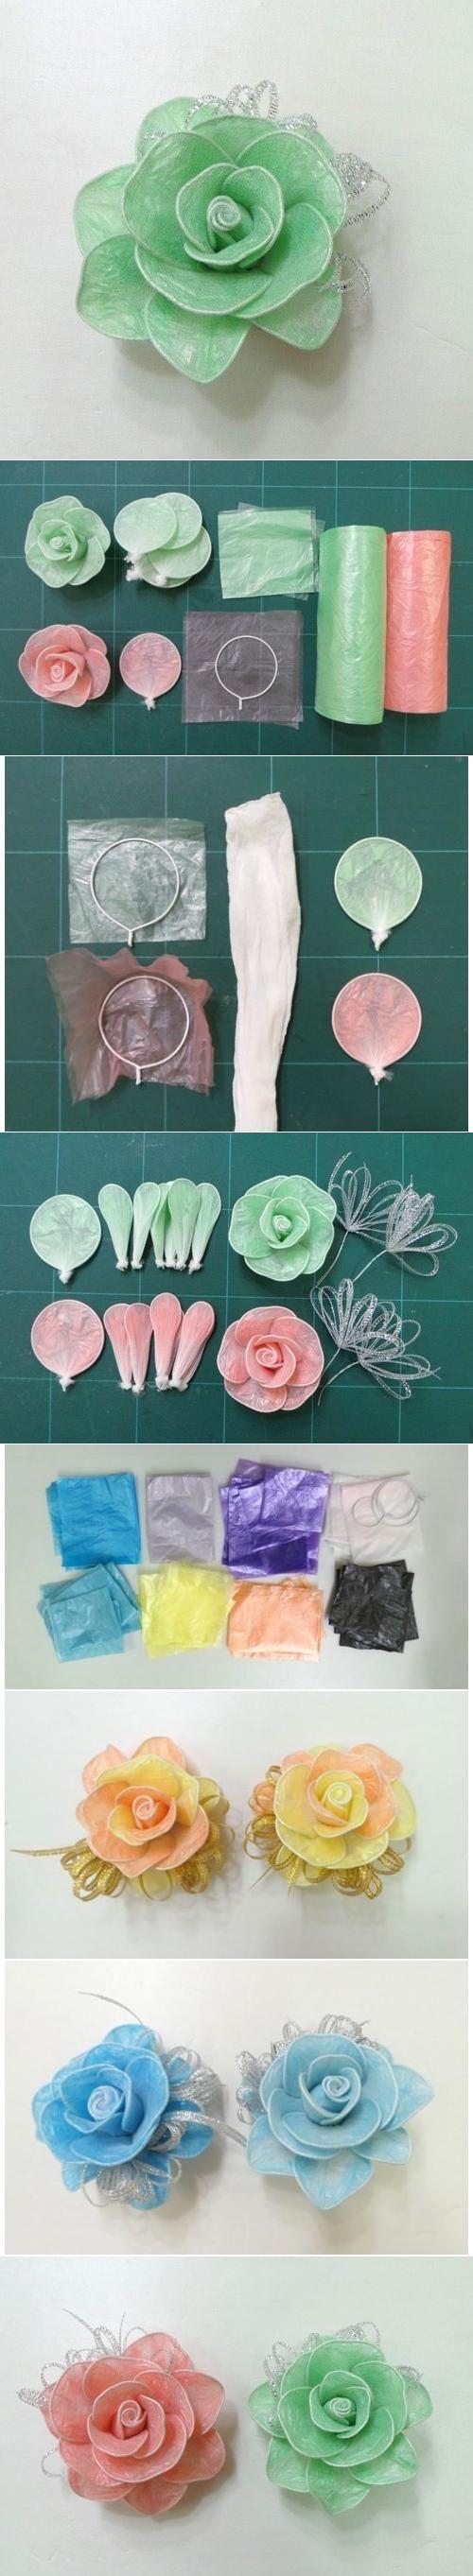 Wedding - DIY Hair Roses Made From Colored Plastic And Twist Ties